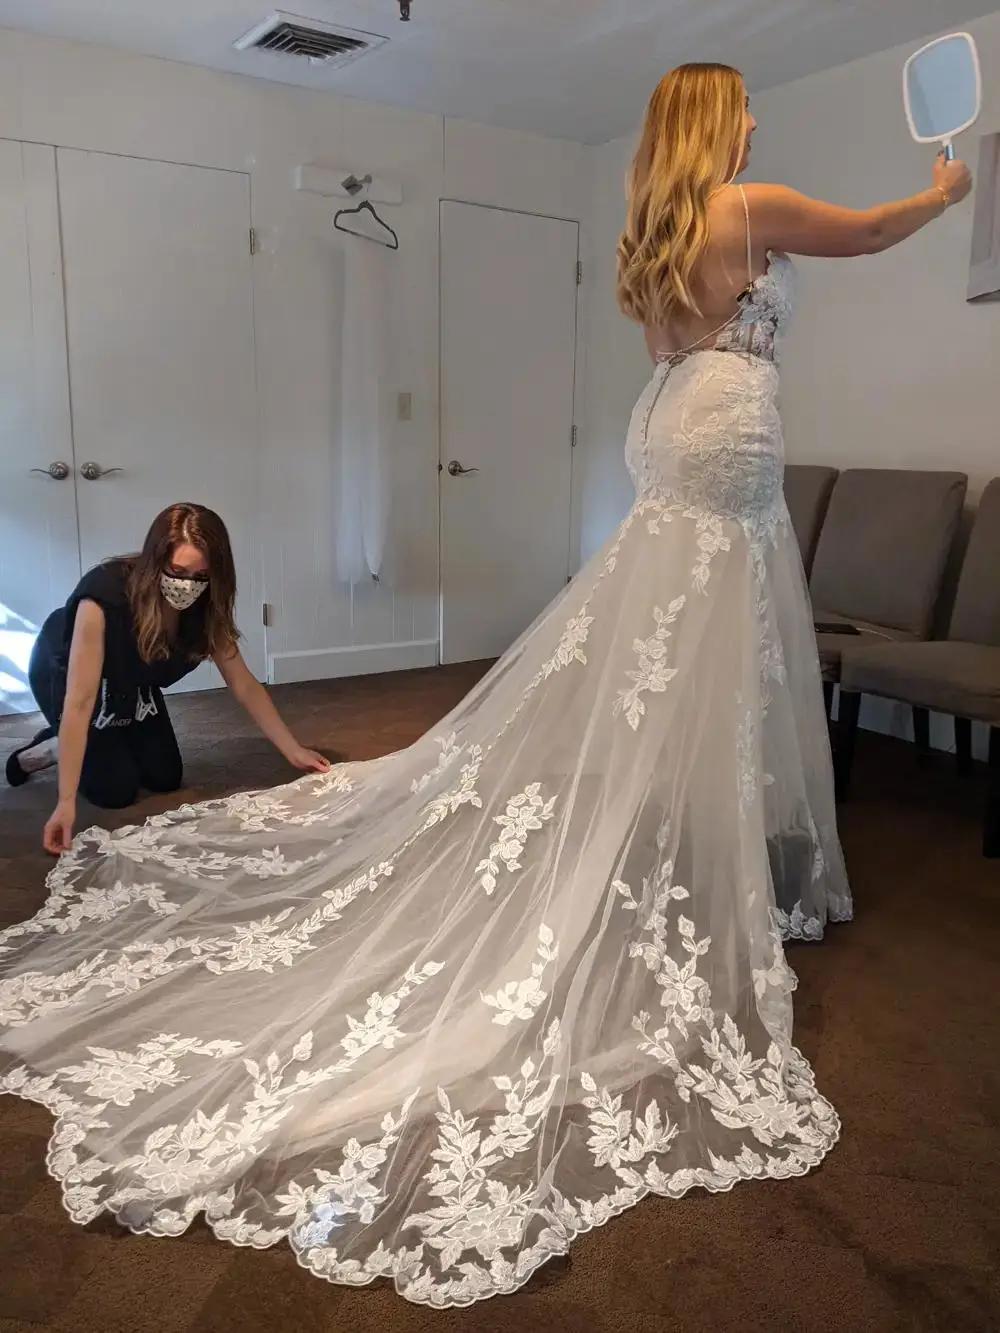 Bride in lace wedding dress with long train and bridal stylist